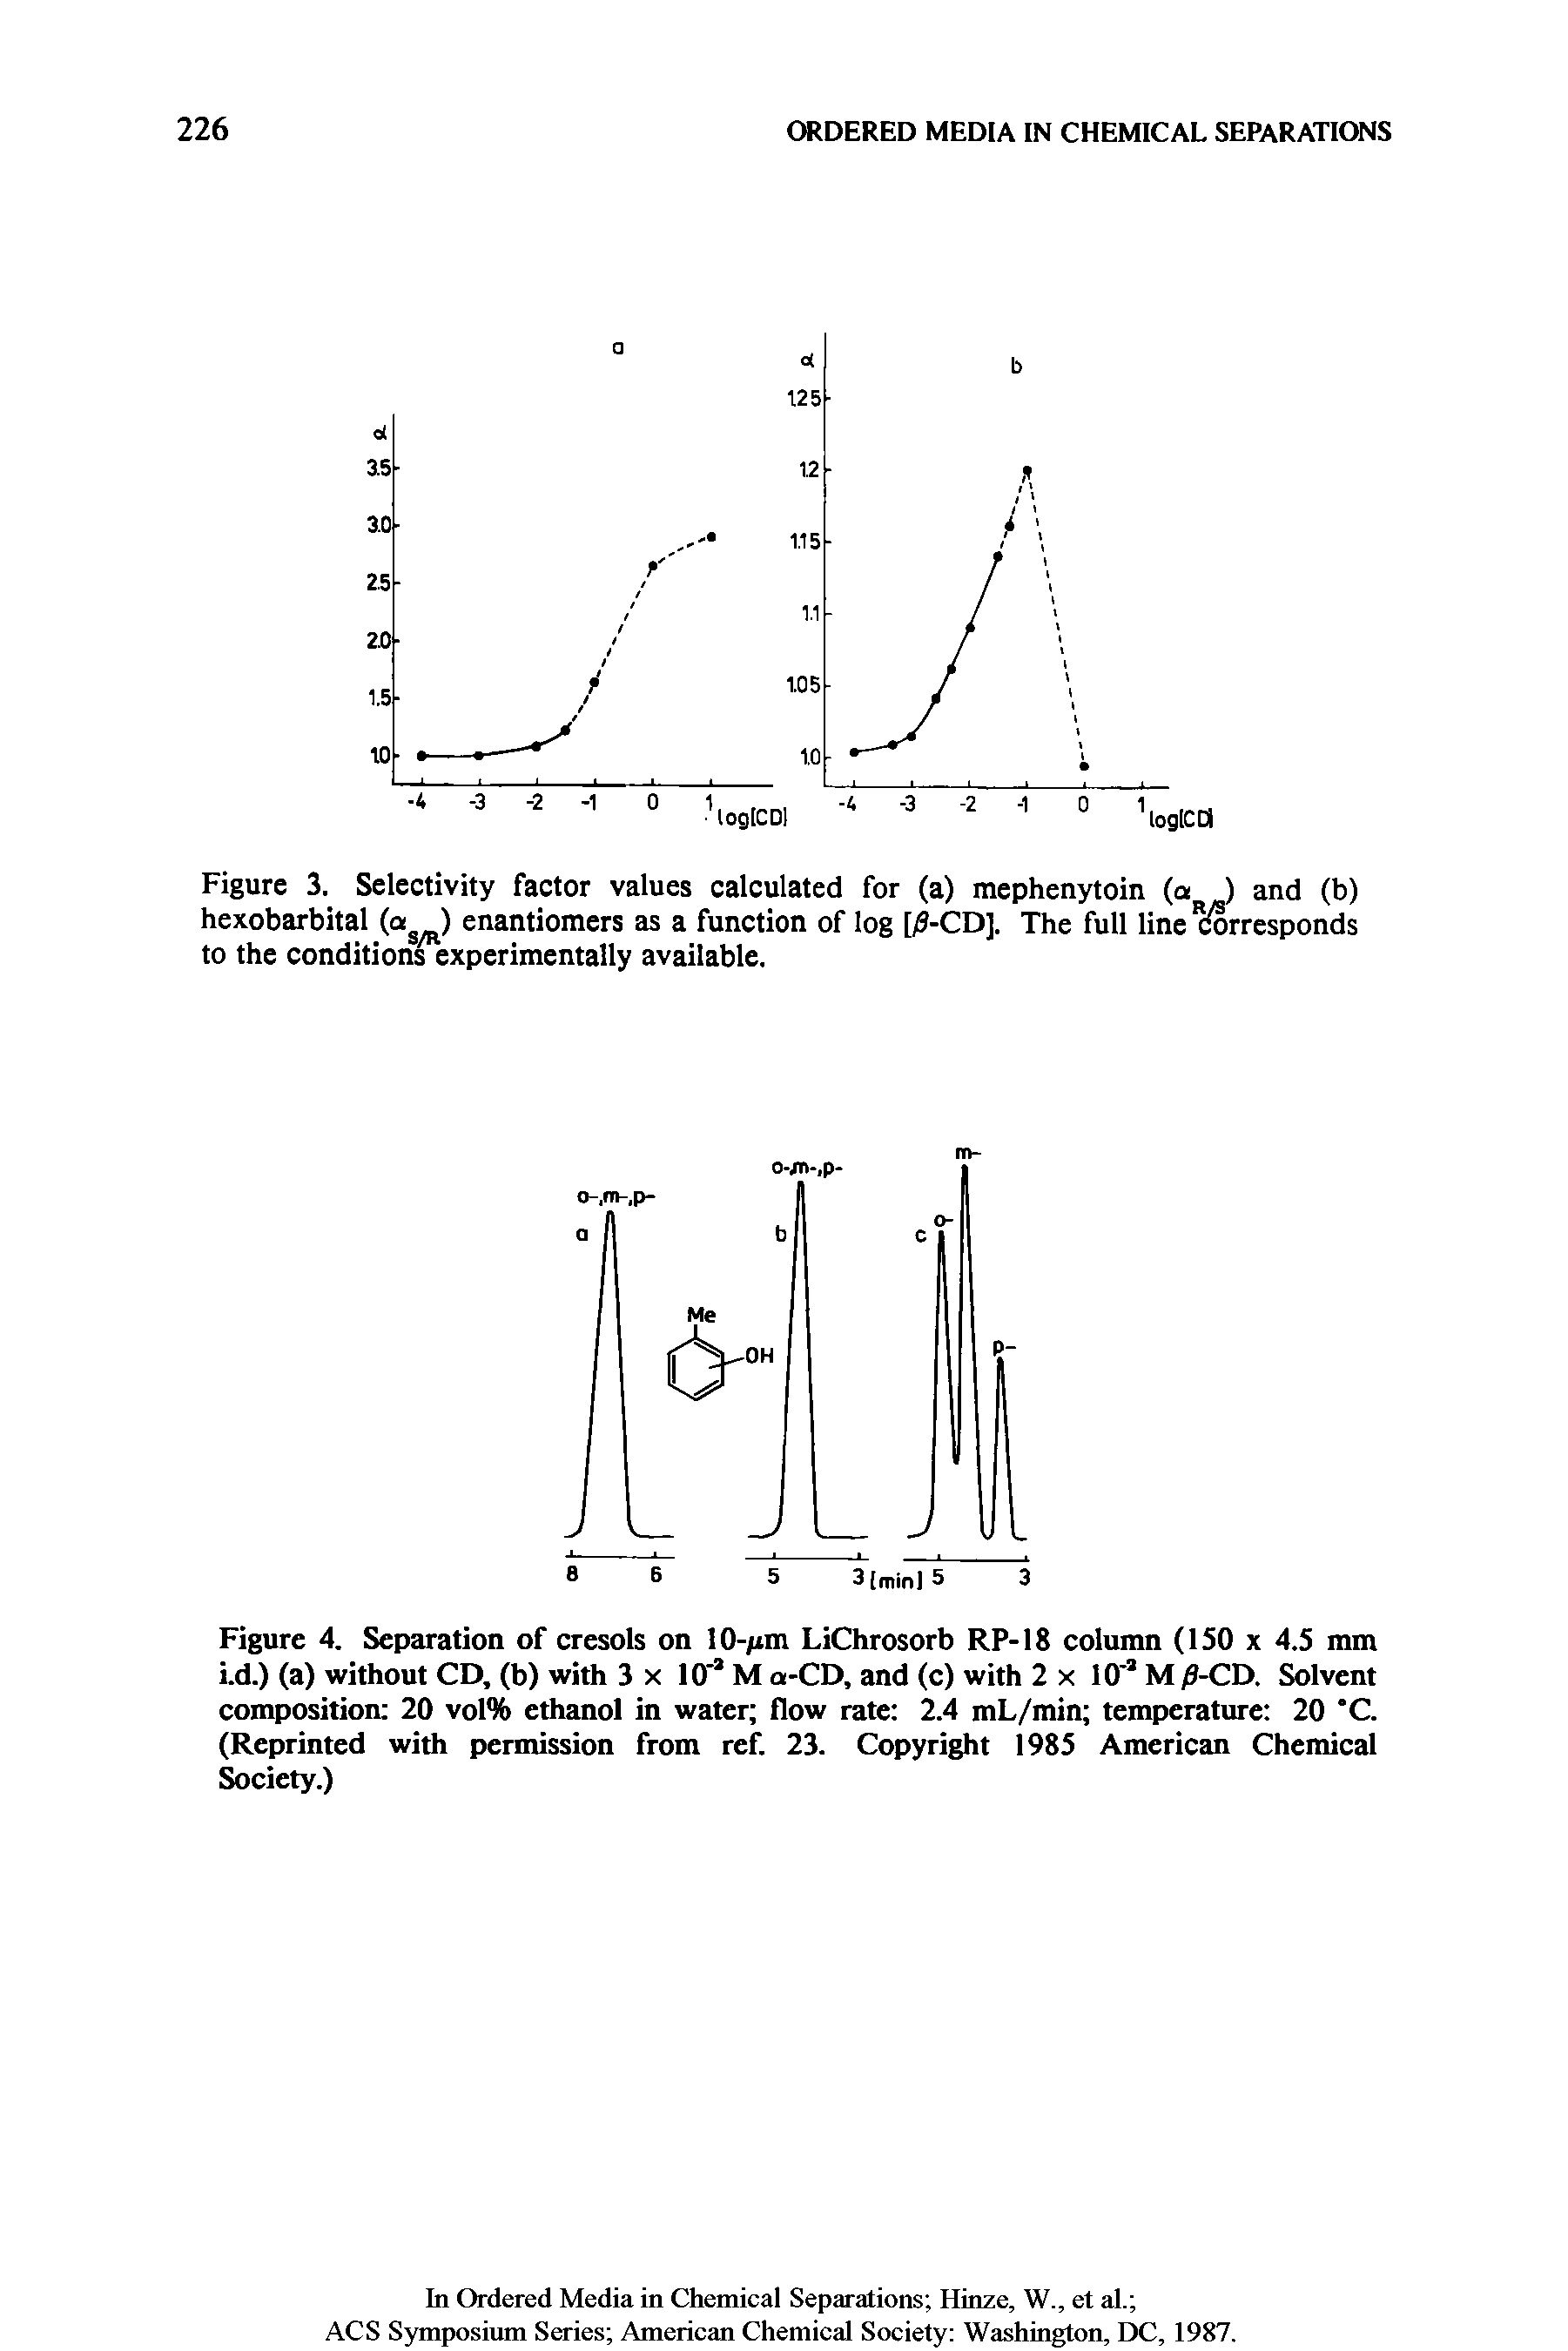 Figure 3. Selectivity factor values calculated for (a) mephenytoin (a ) and (b) hexobarbital (a ) enantiomers as a function of log [/3-CD], The full line corresponds to the conditions experimentally available.